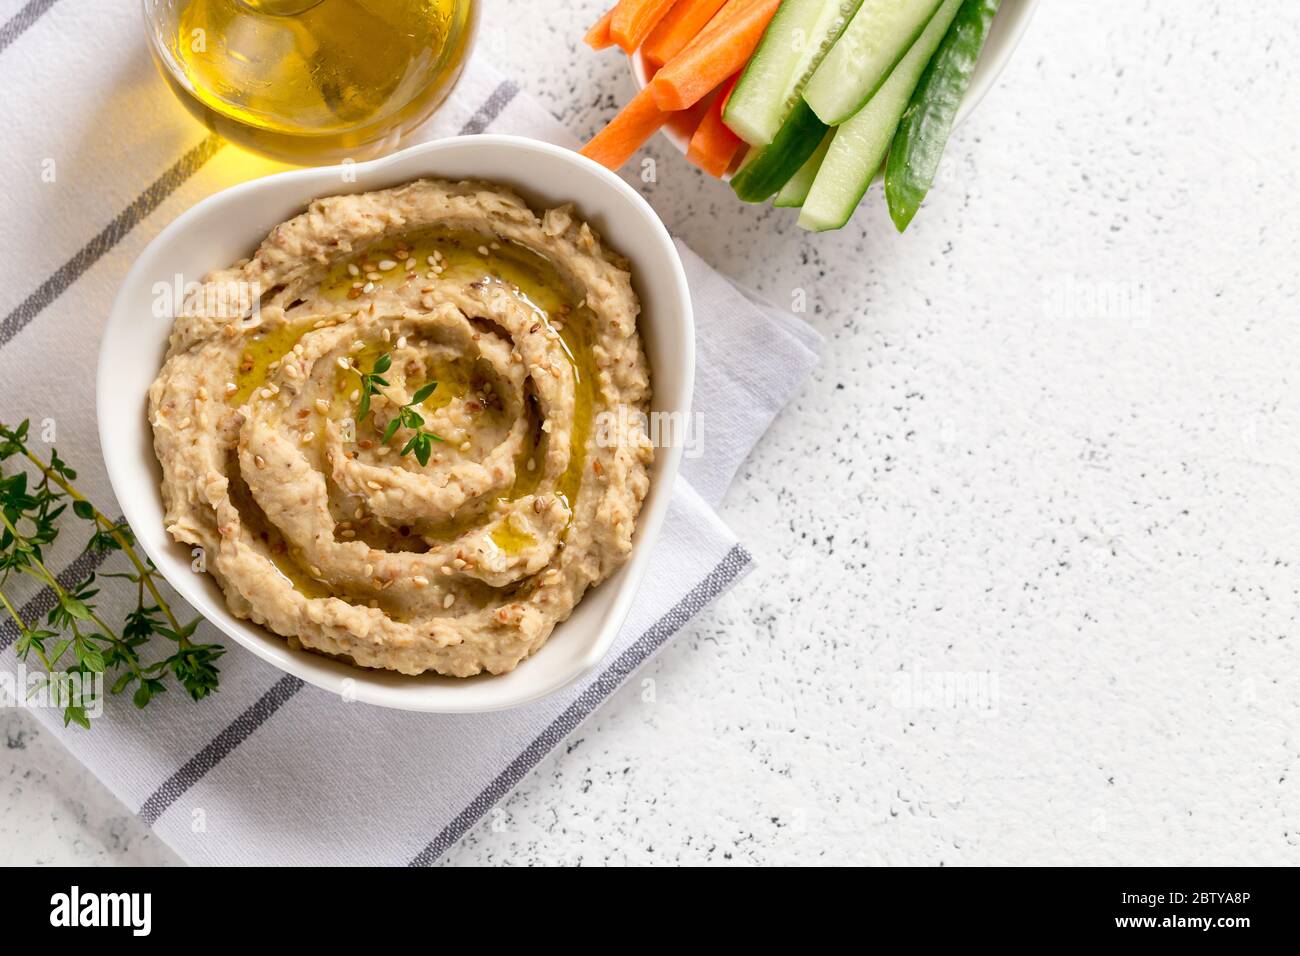 hummus sauce in a bowl, sesame seeds, olive oil, cucumber and carrots on a light background Stock Photo